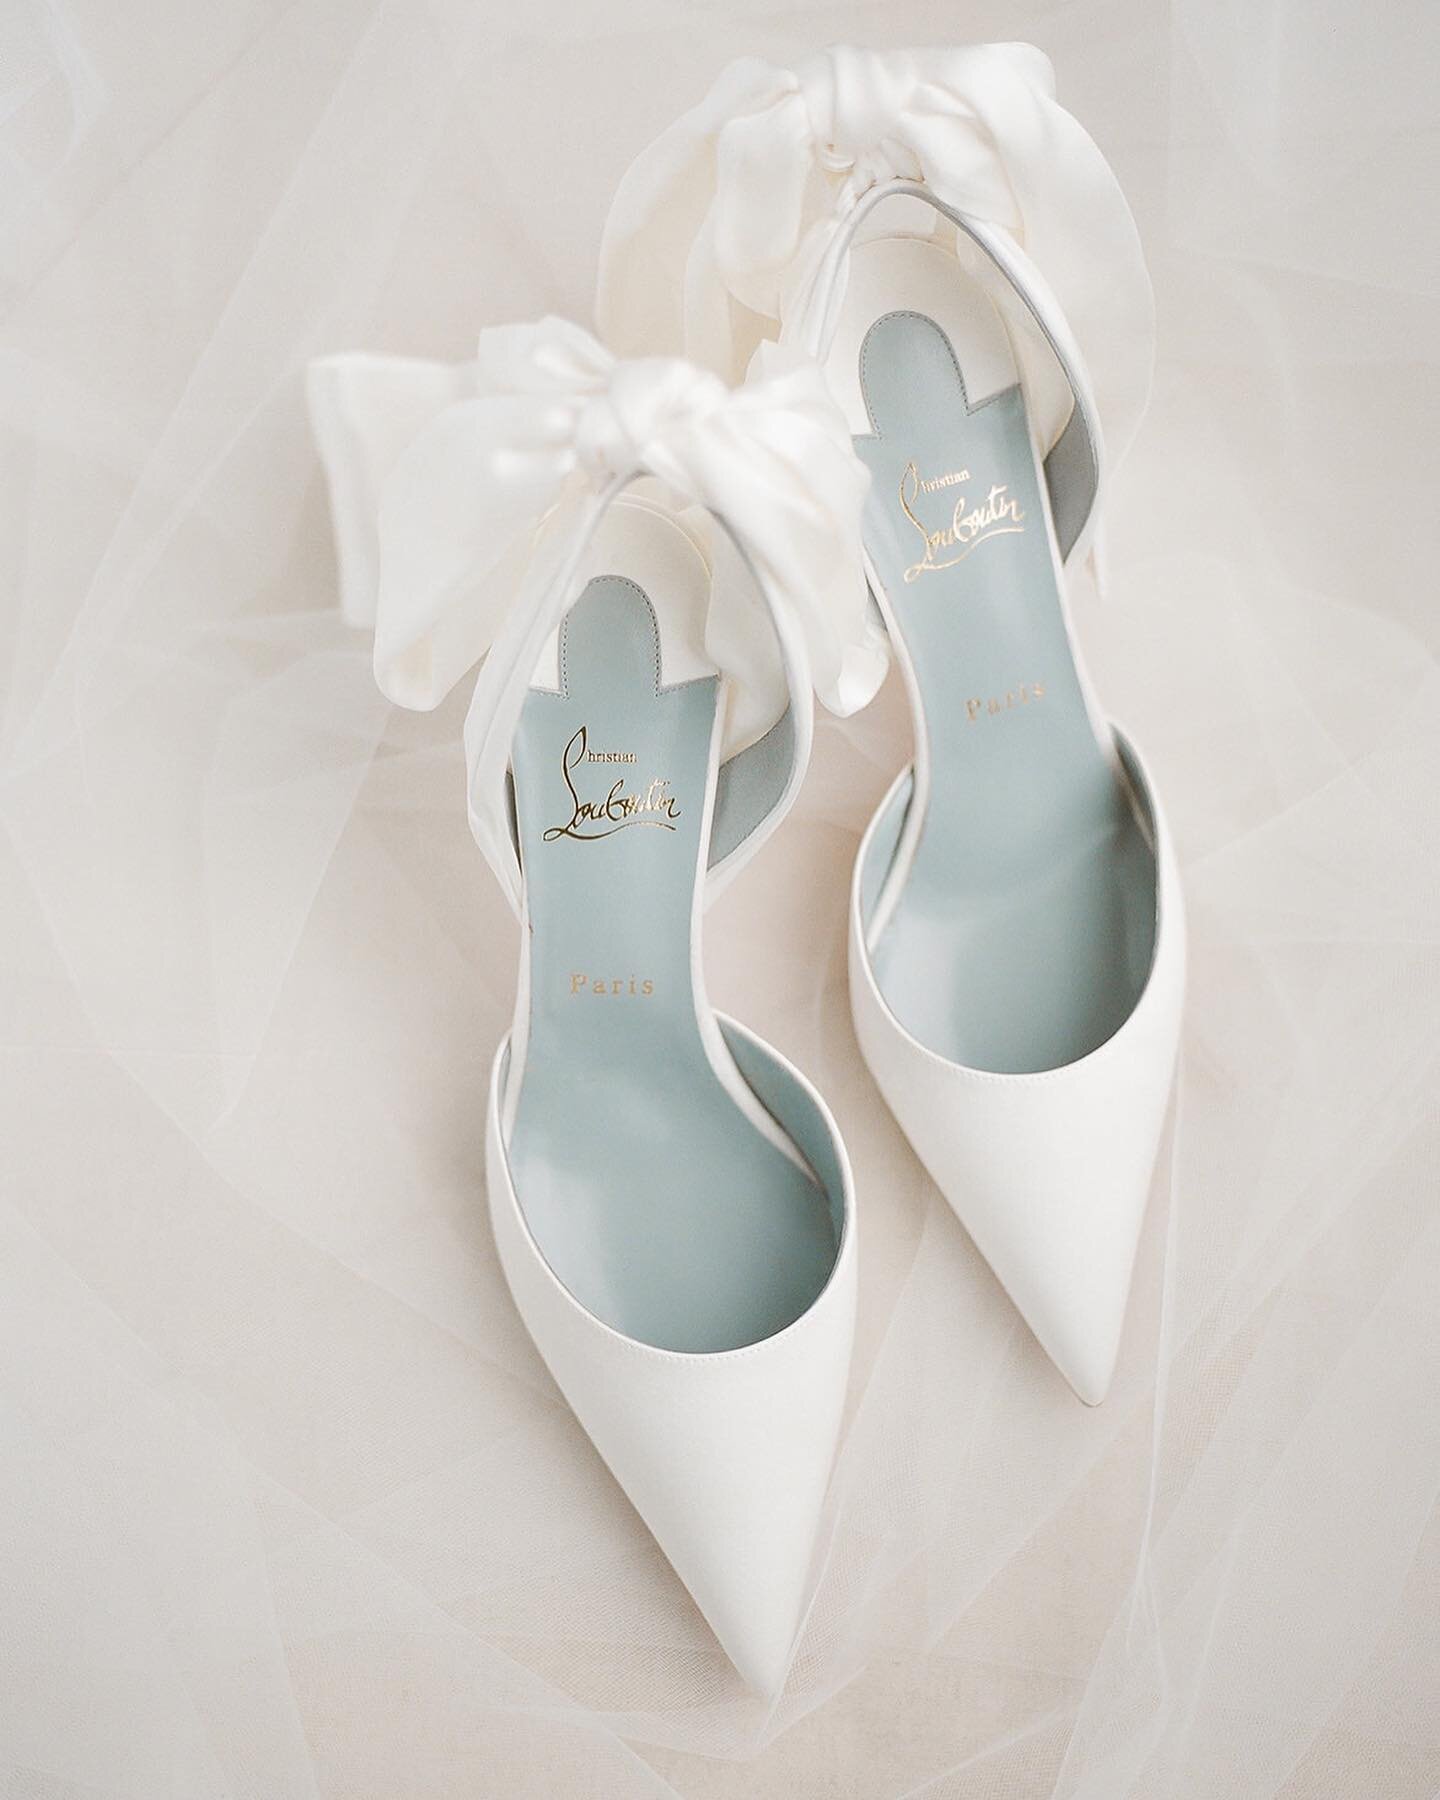 Something I&rsquo;ve noticed consistent among Elle and James Co. Brides:

Great taste in shoes ✨

photo: @tetianaphotography